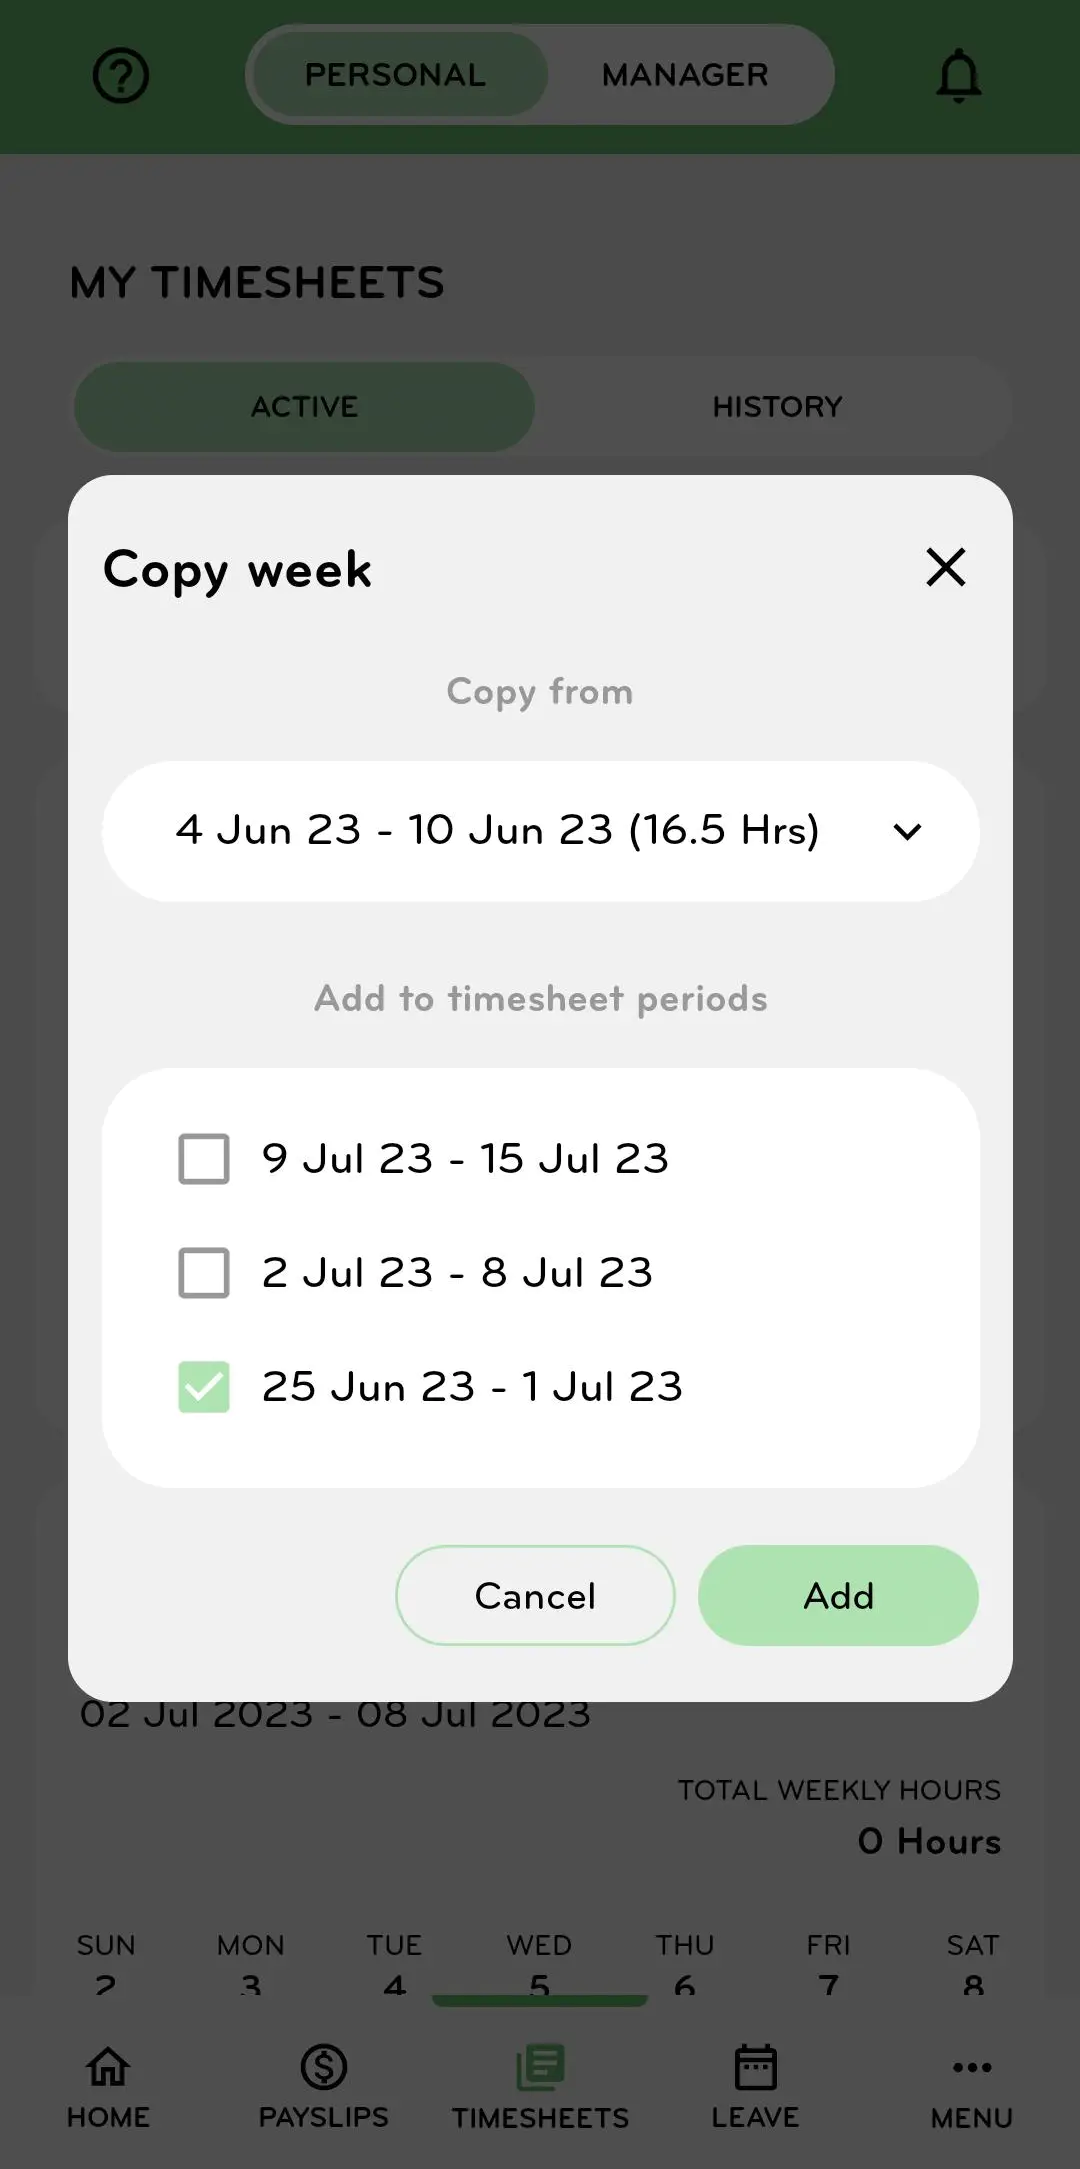 Choose which week to copy from and which week to copy to.